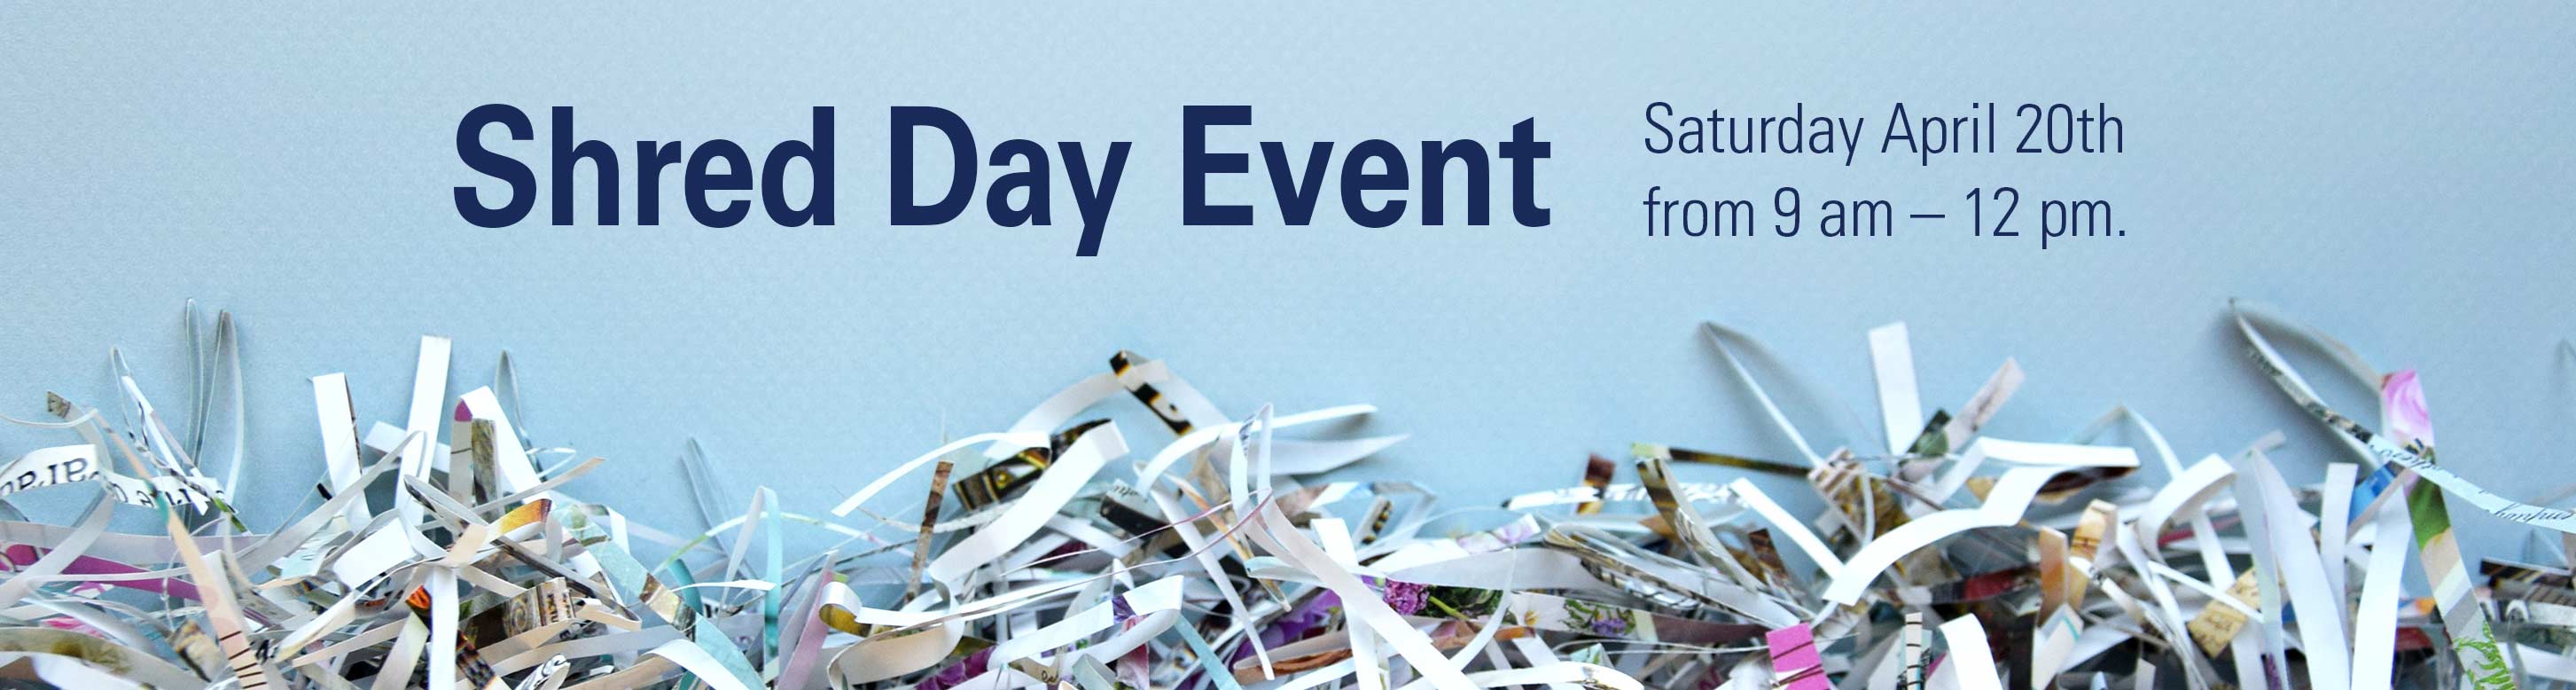 Shred day event. Saturday April 20th from 9m to 12pm